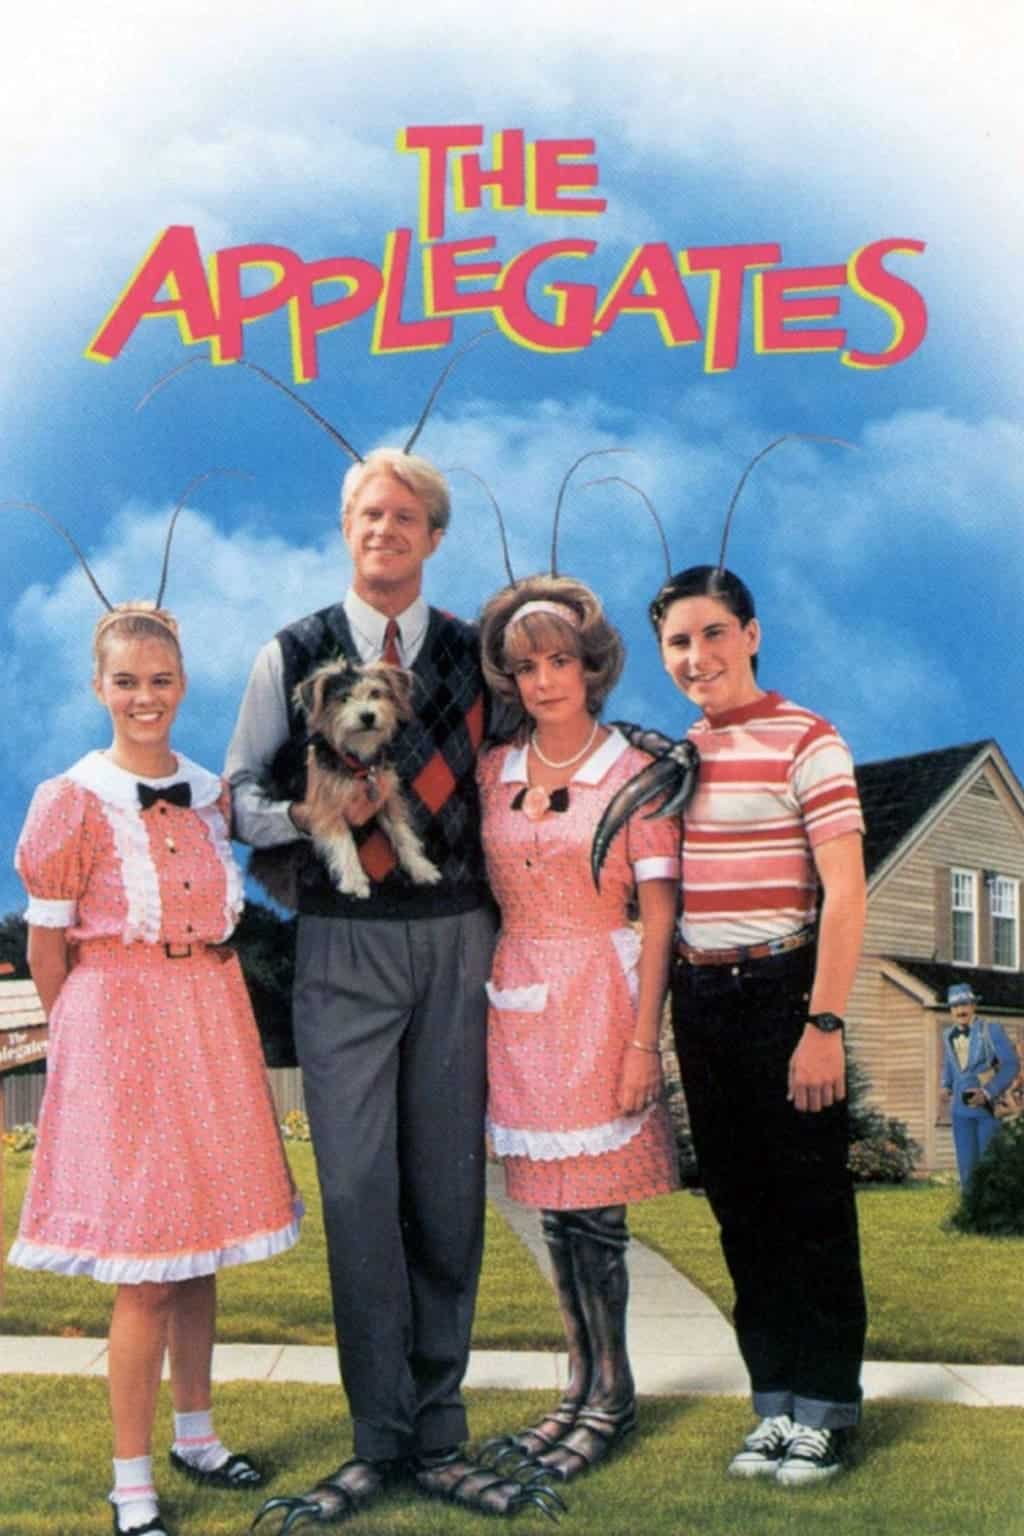 Horror in the 90s: Meet the Applegates